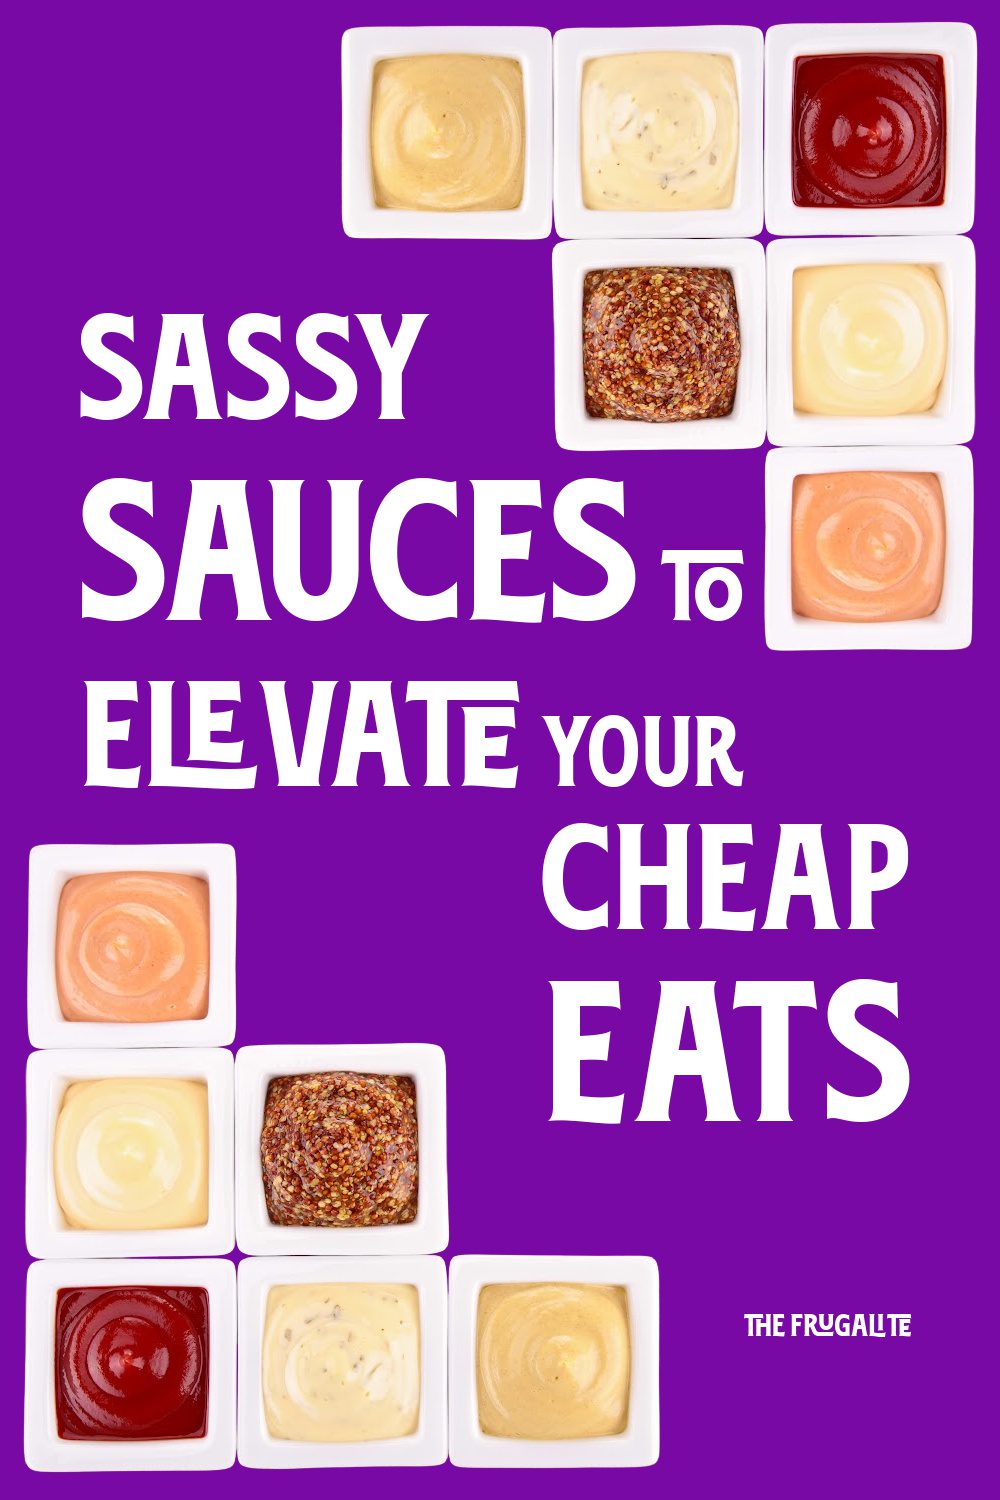 Sassy Sauces to Elevate Your Cheap Eats